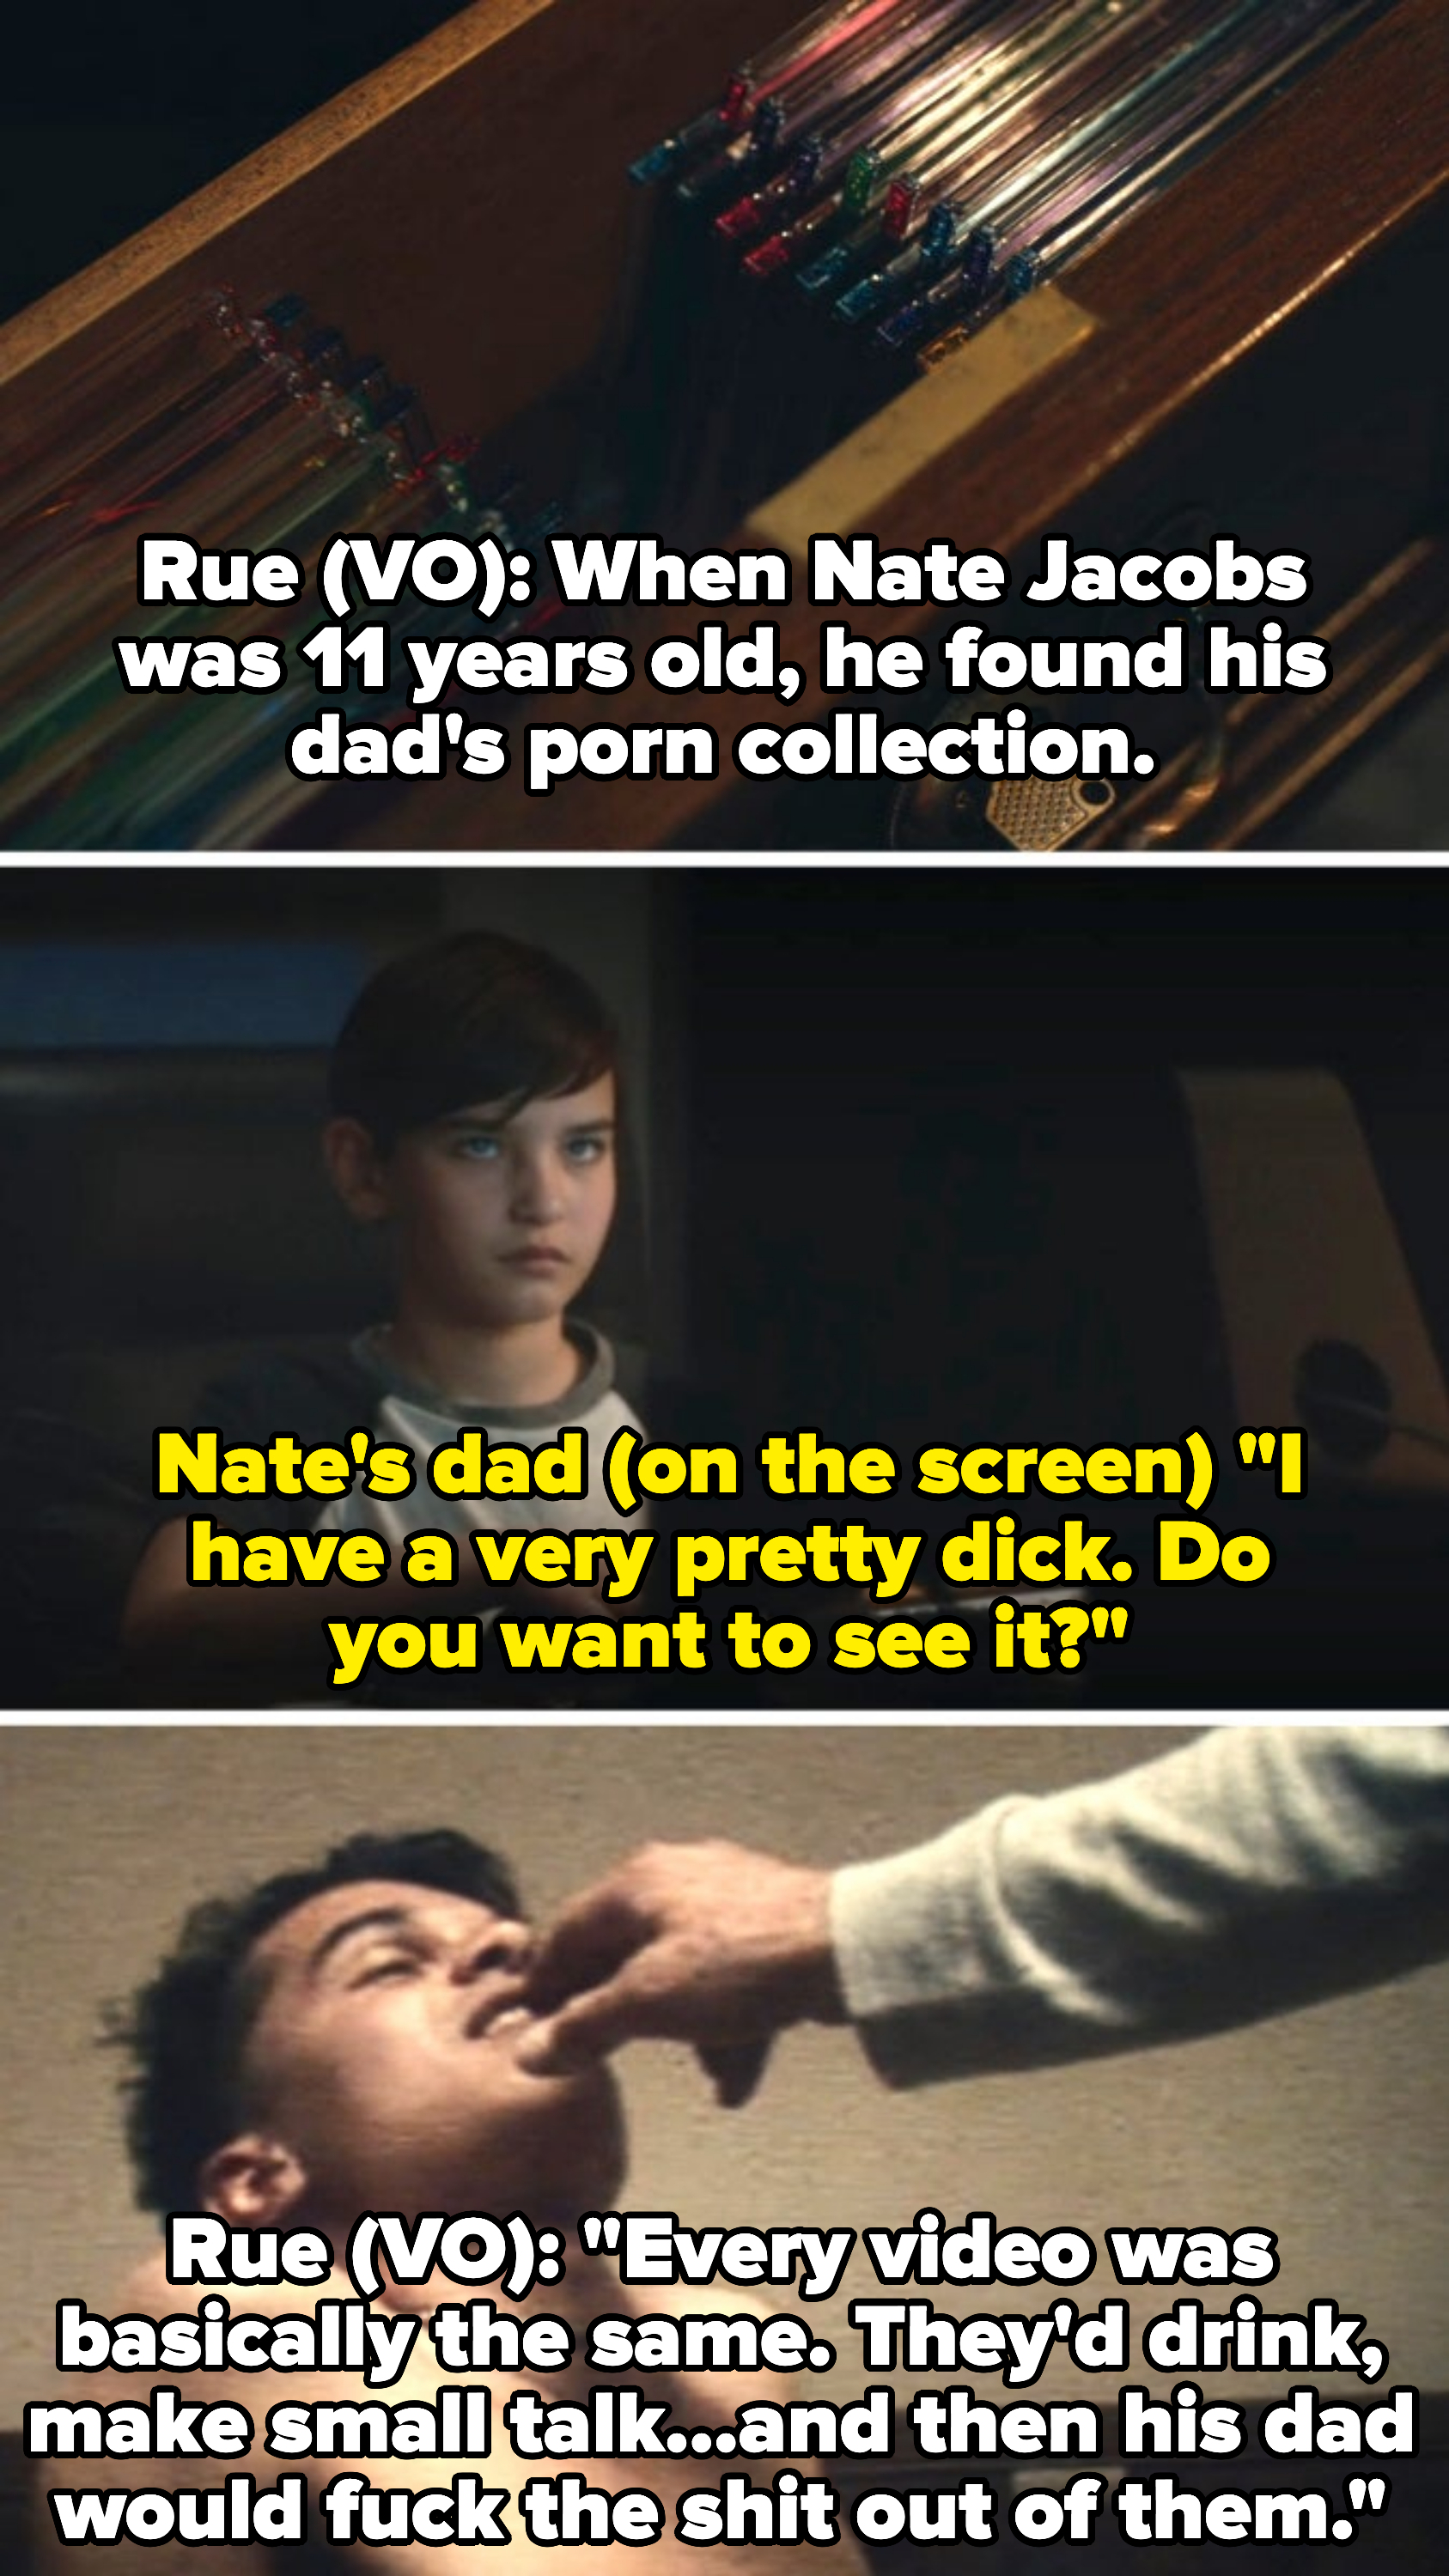 voice over saying, when nate jacobs was 11 years old  he found his dad&#x27;s porn collection